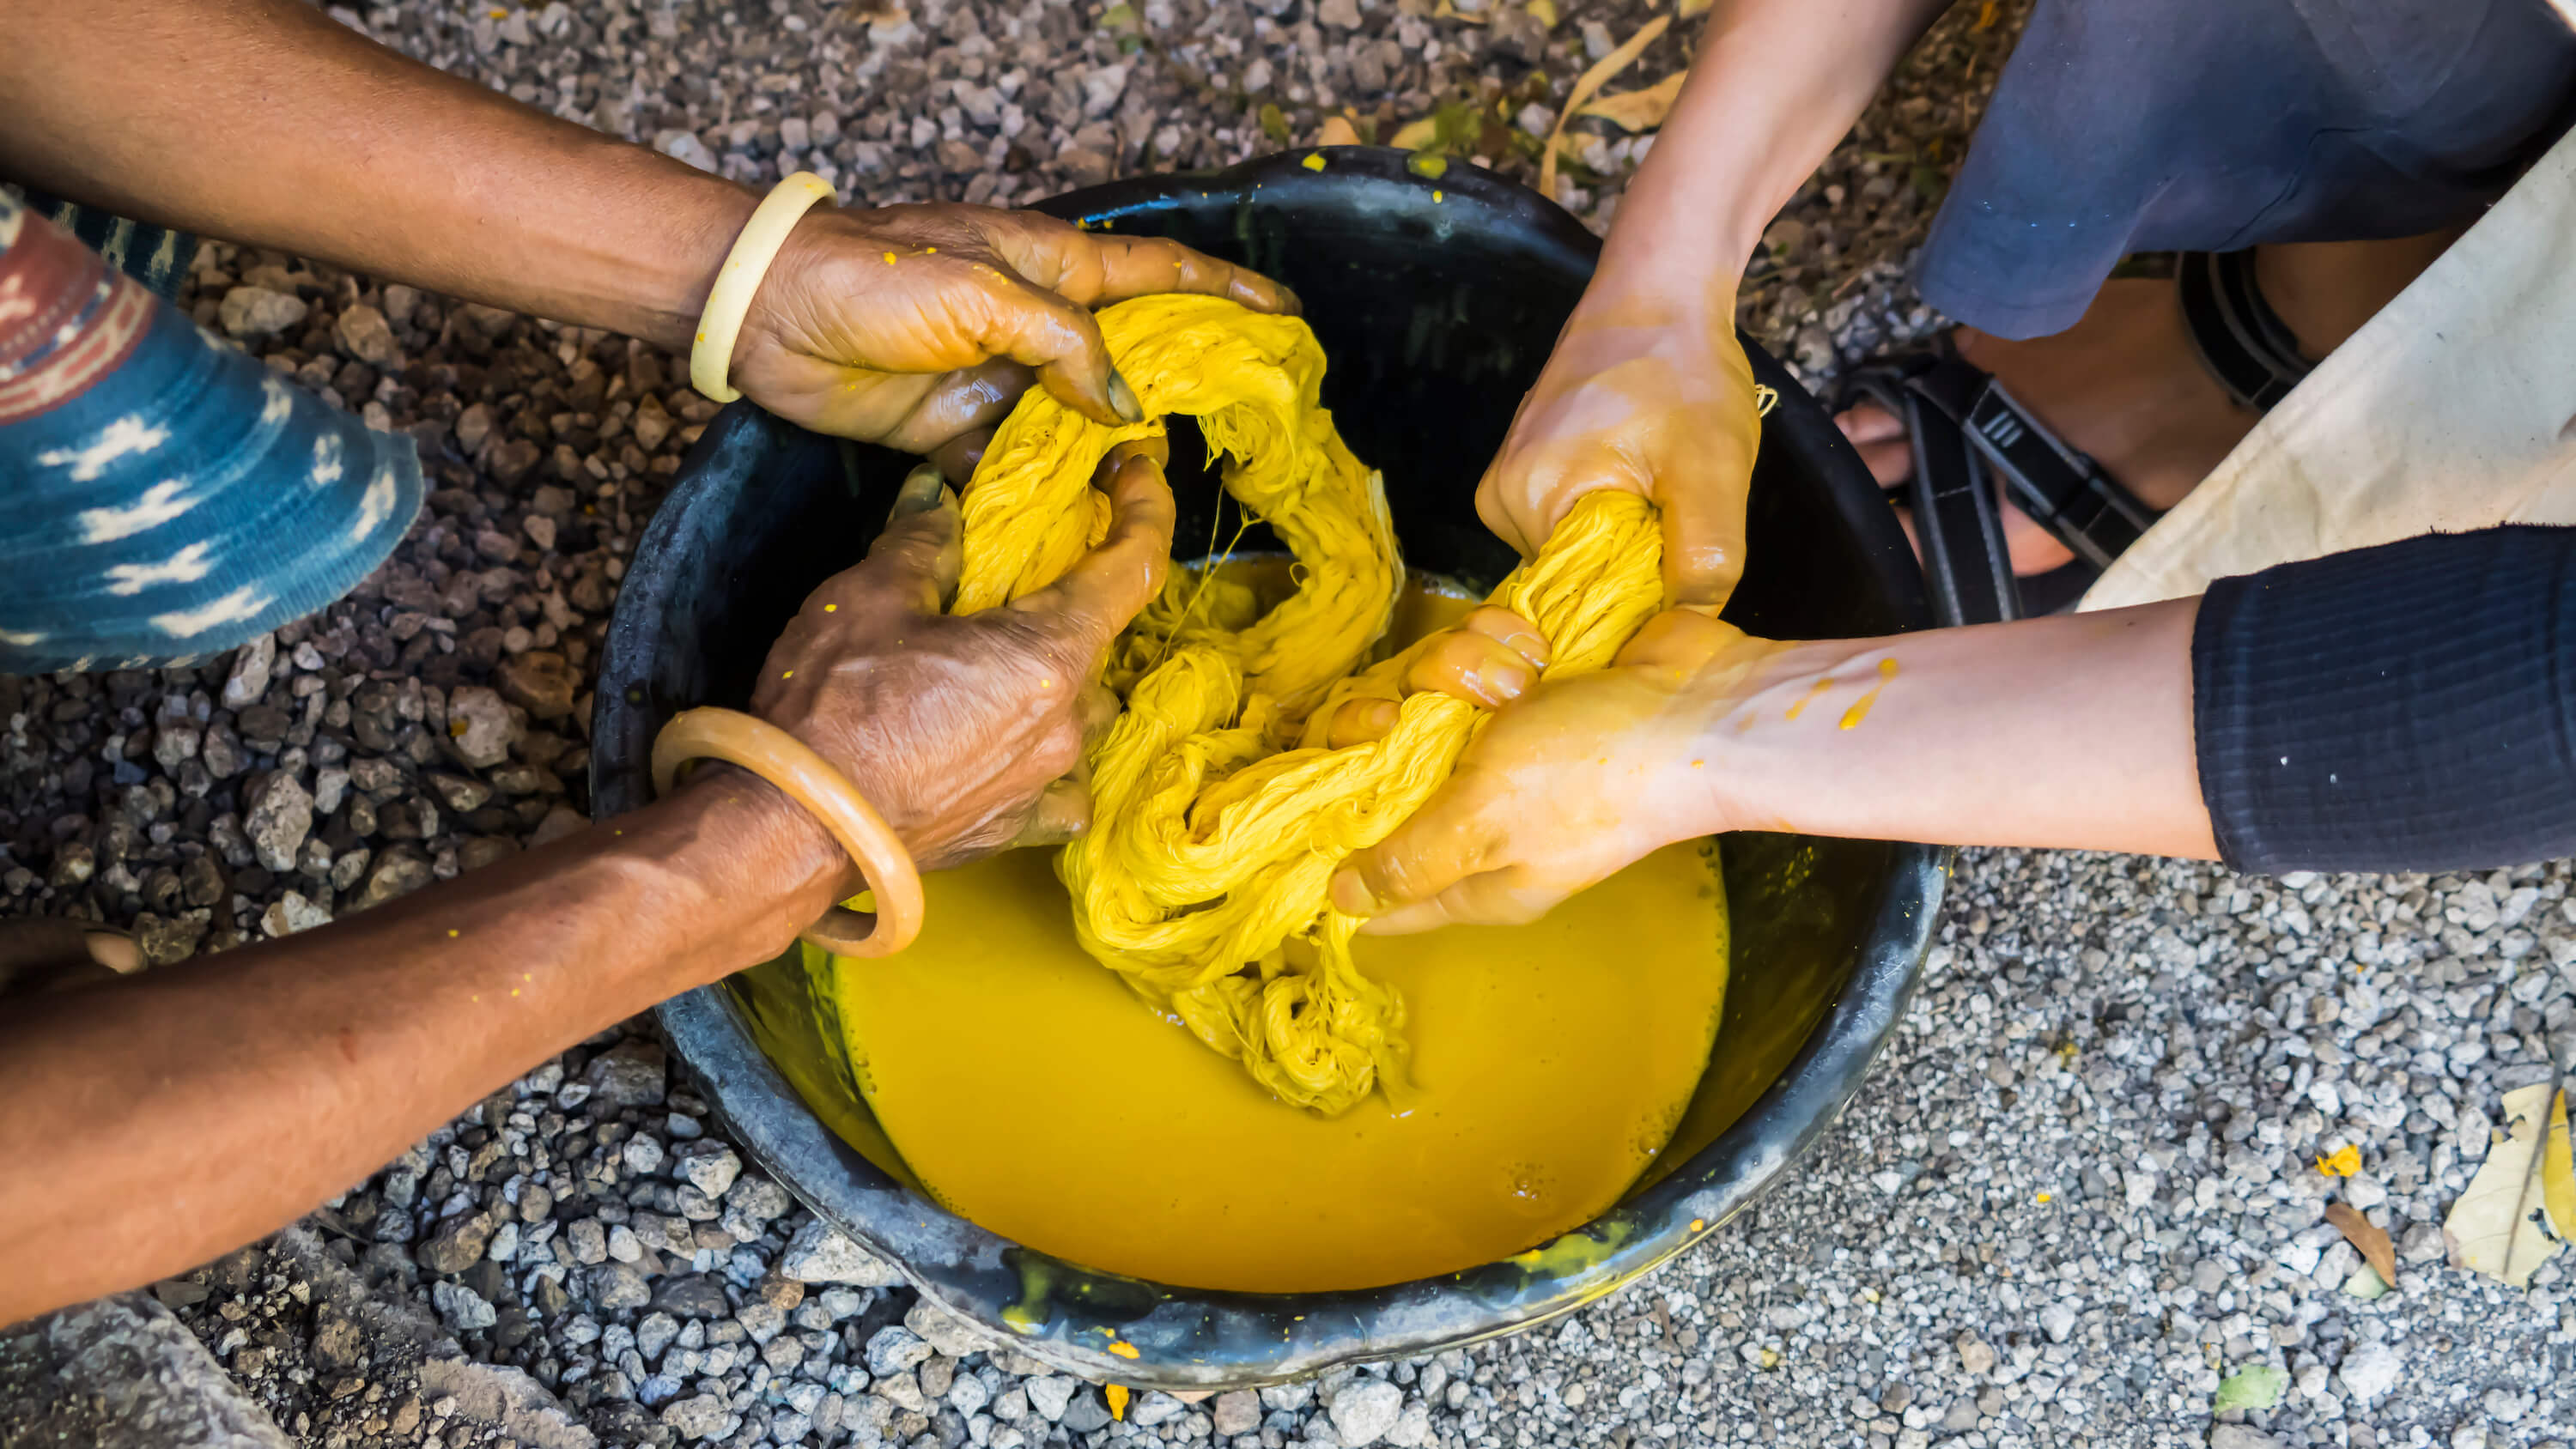 Stained hands and nails were part of the fun in Orinila’s vegetable dye workshop. Photo by Andra Fembriarto